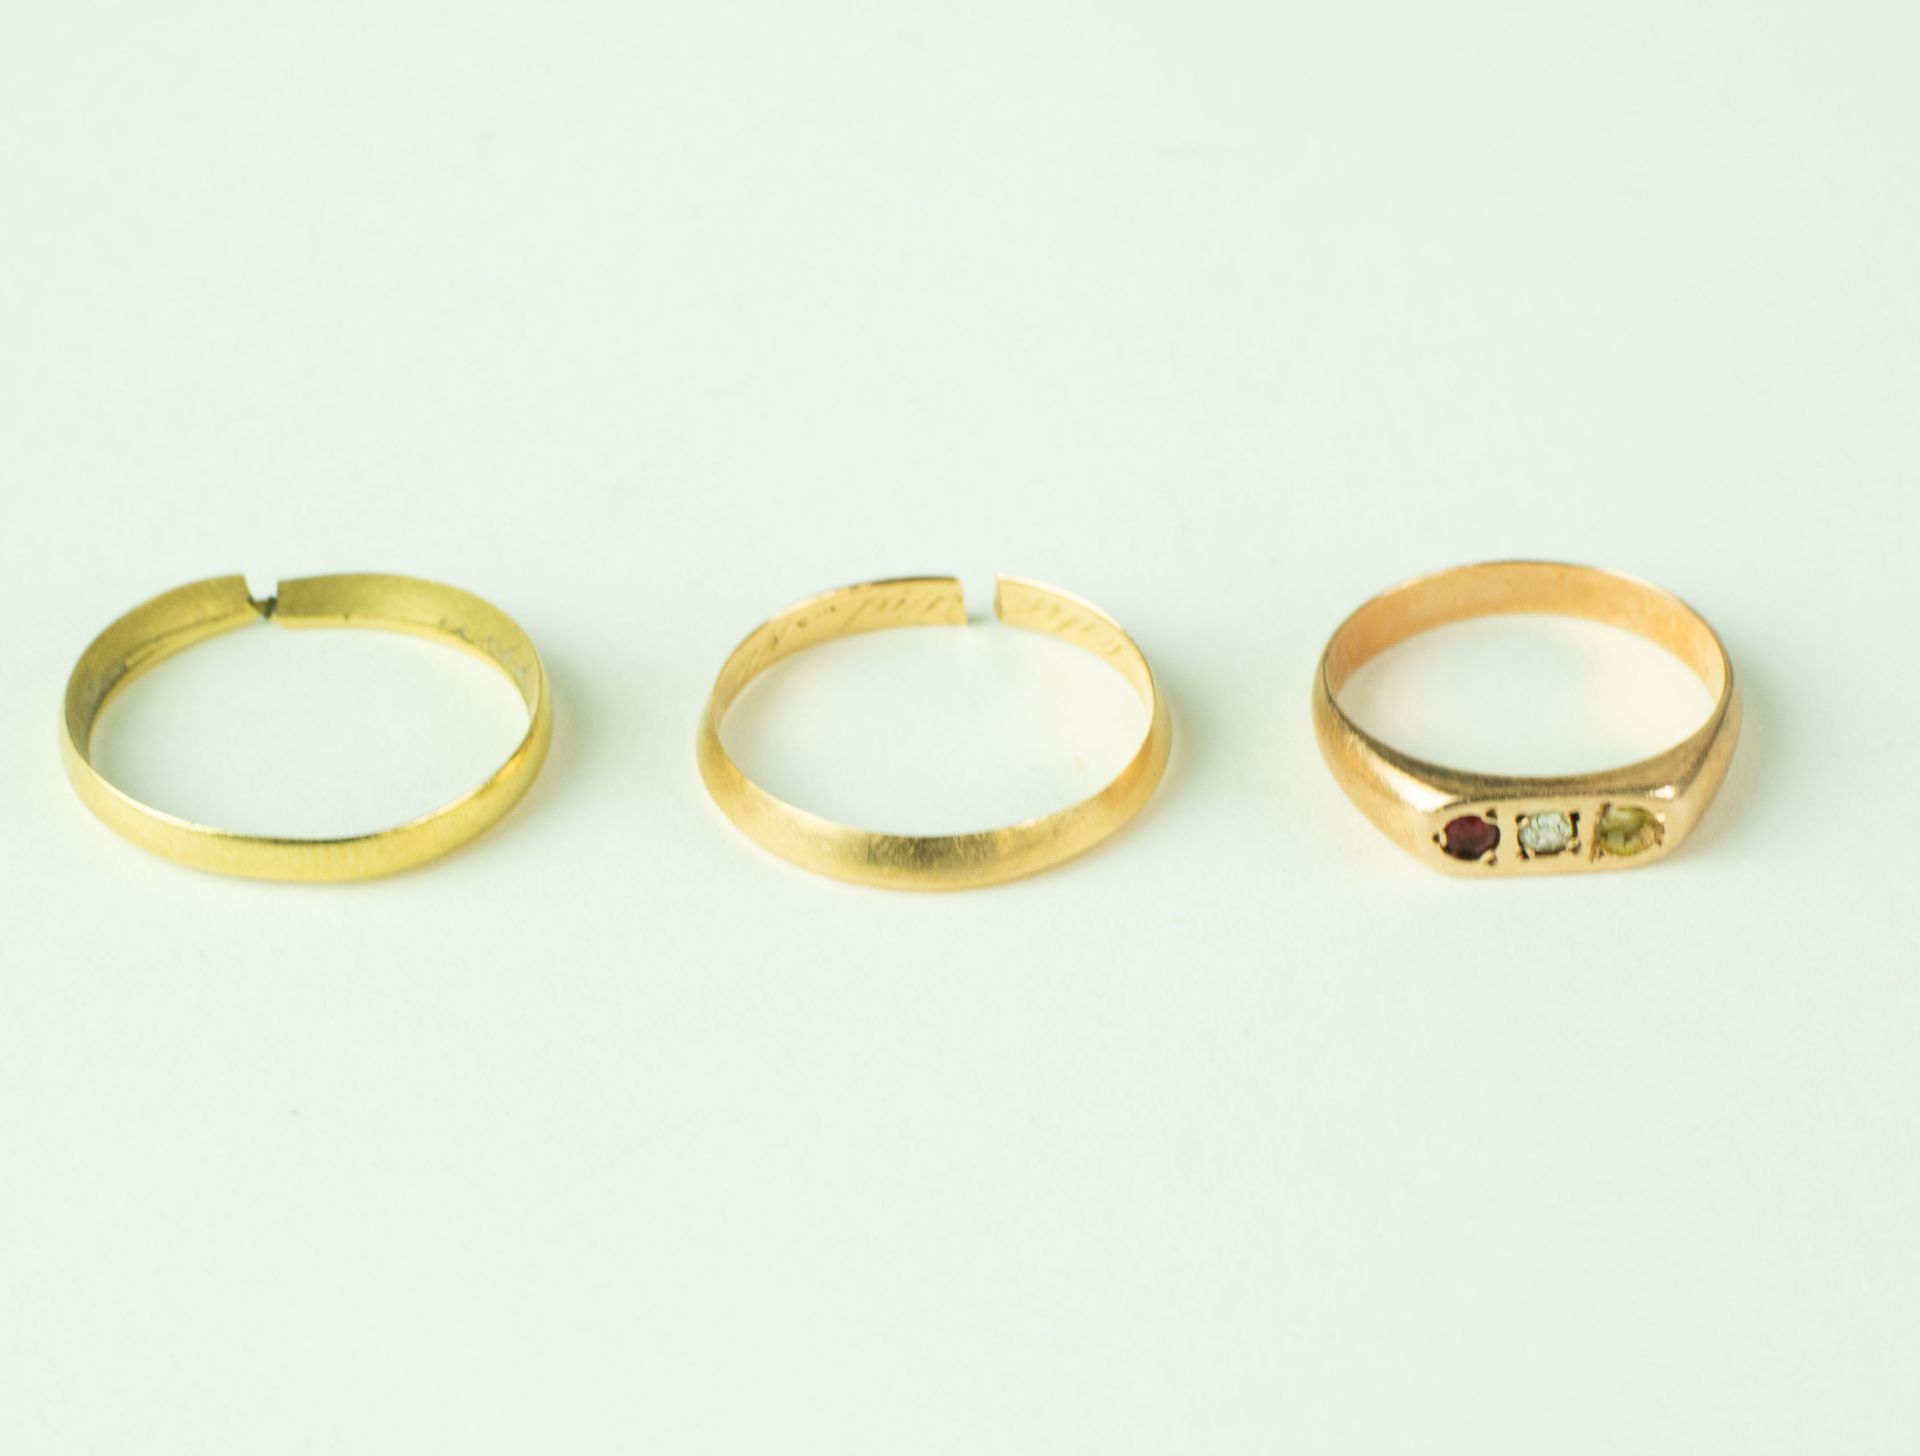 6 gold rings - Image 2 of 3